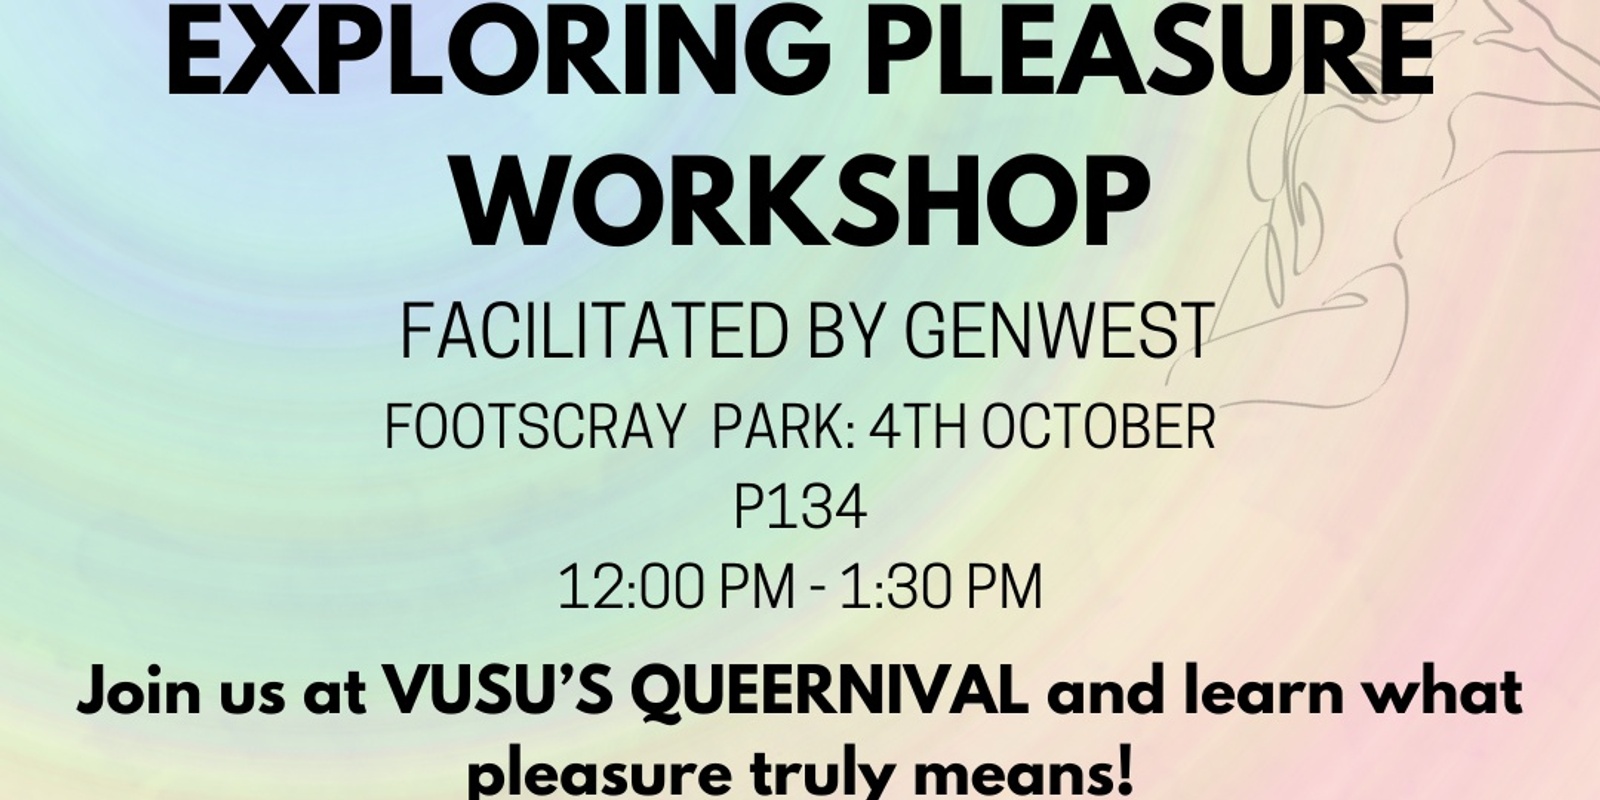 Banner image for Exploring Pleasure Workshop - Wednesday 4th October